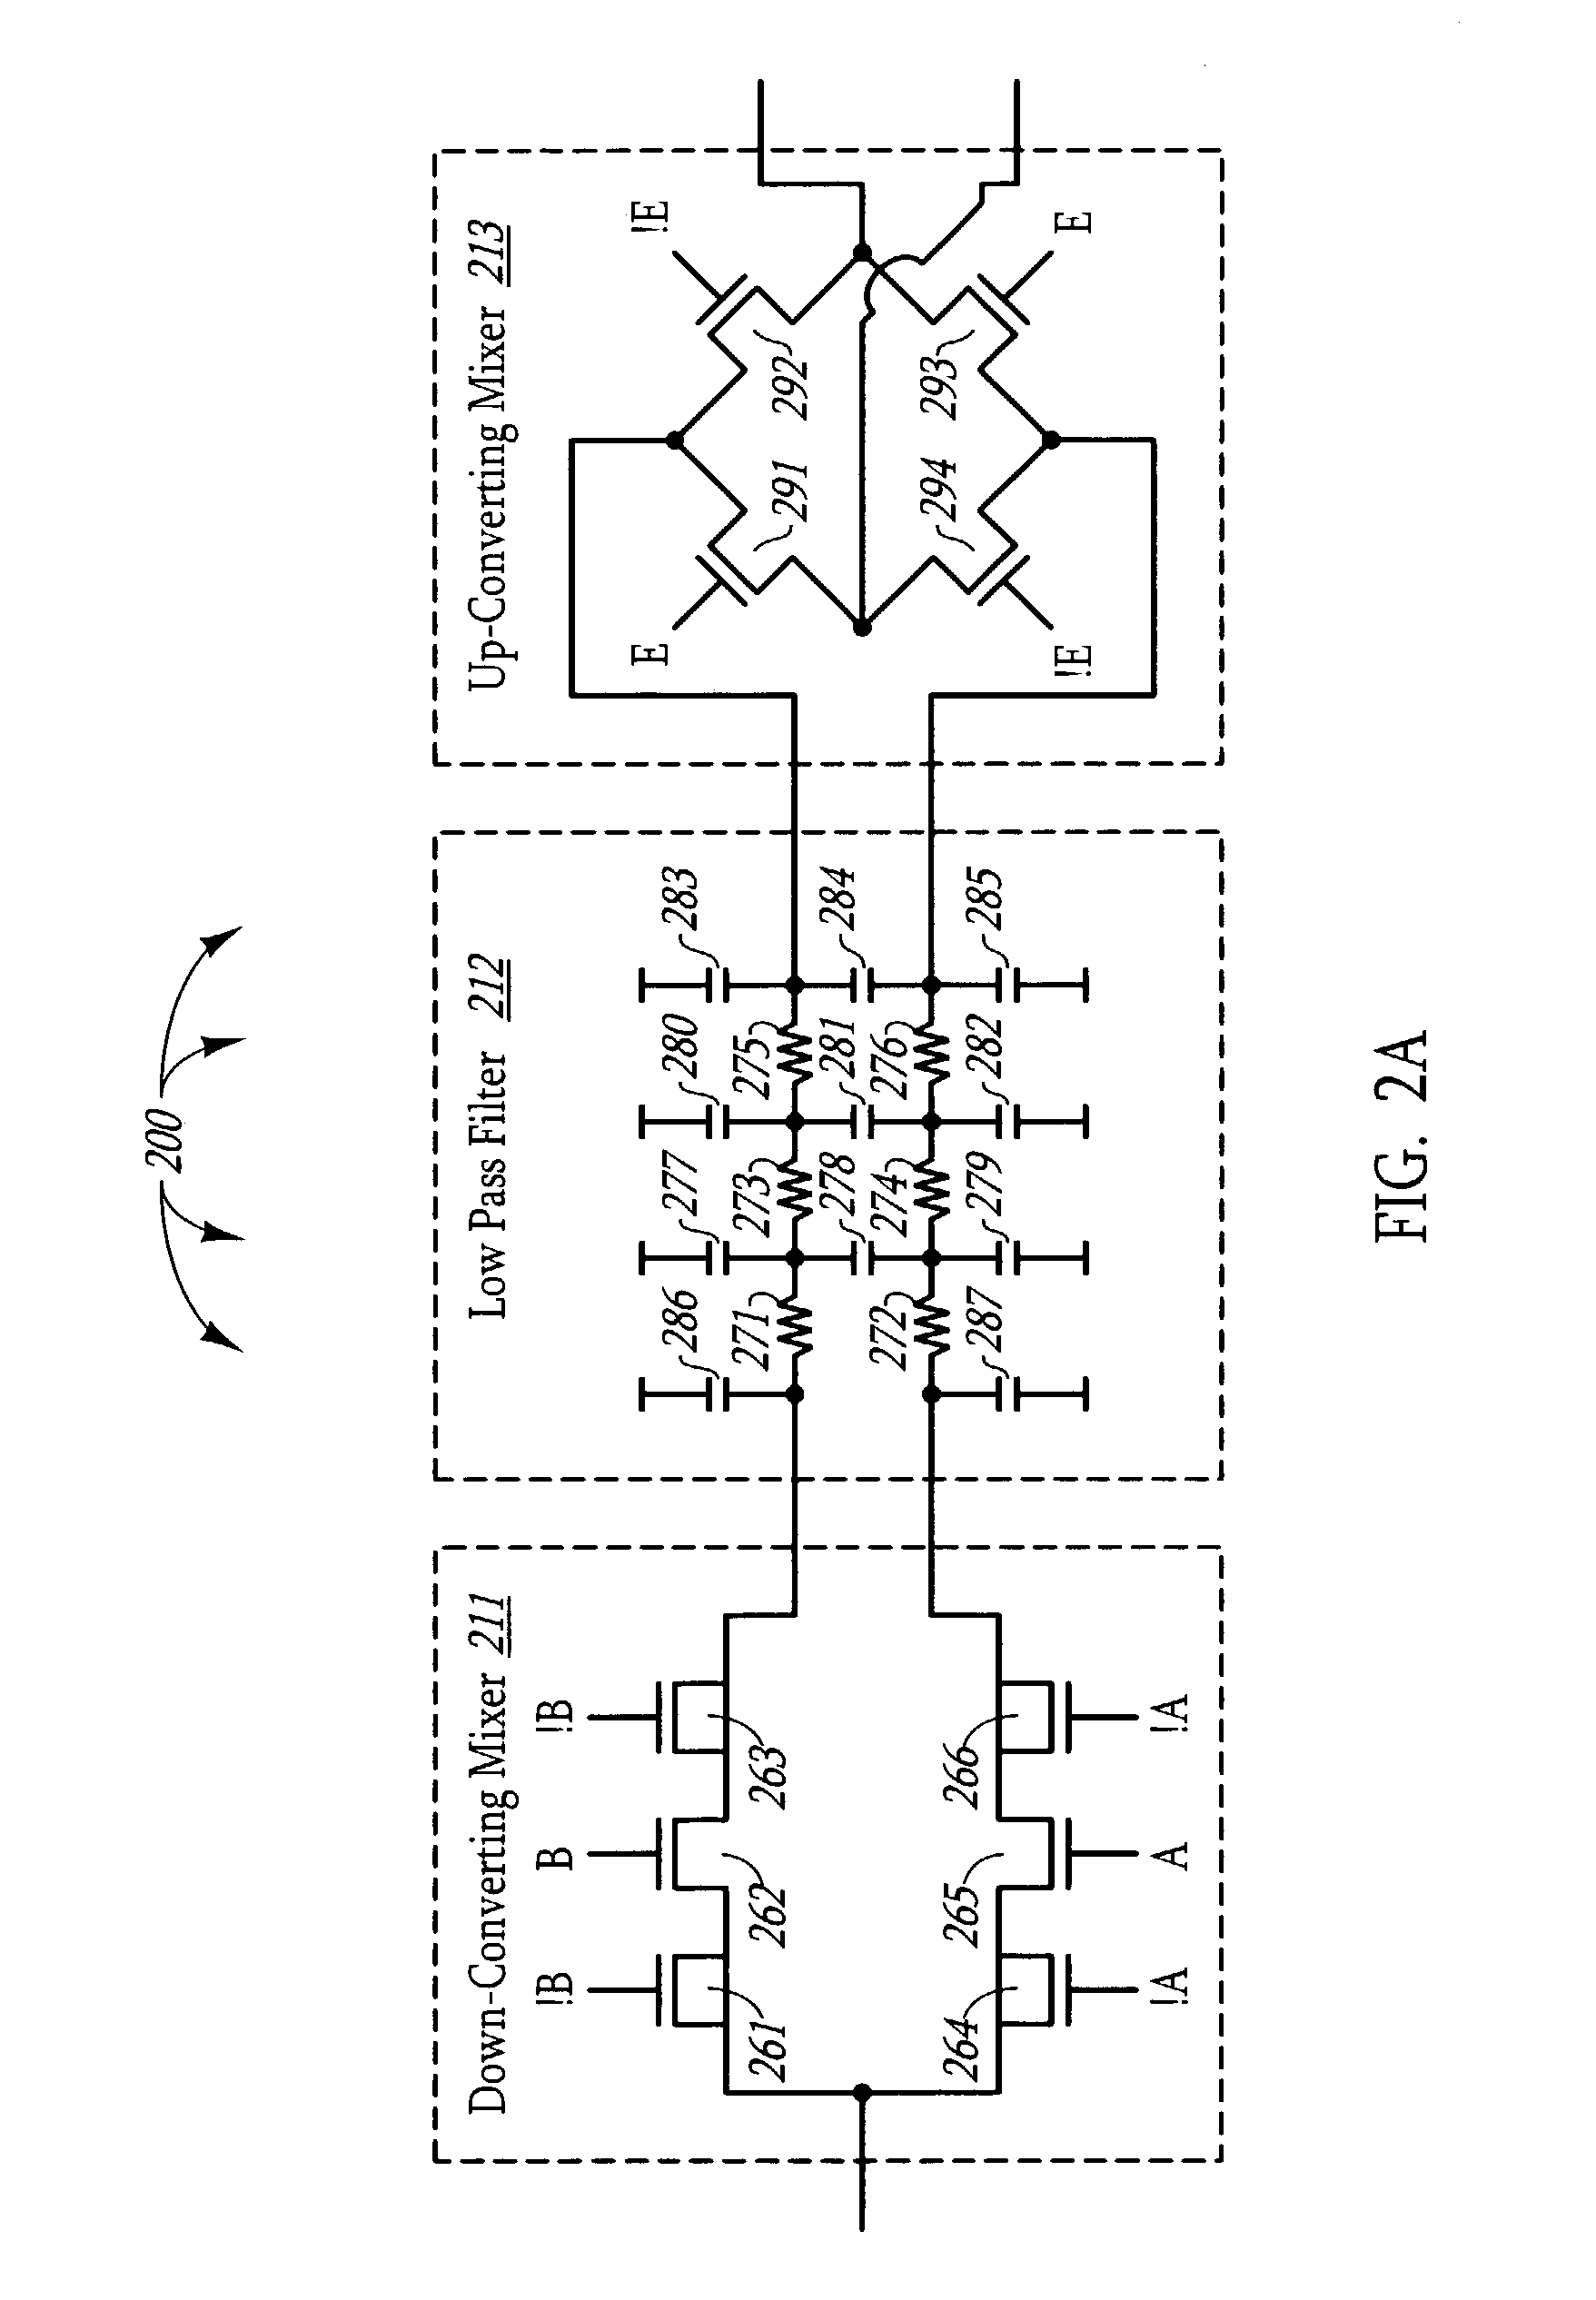 Up-conversion of a down-converted baseband signal in a direct conversion architecture without the baseband signal passing through active elements